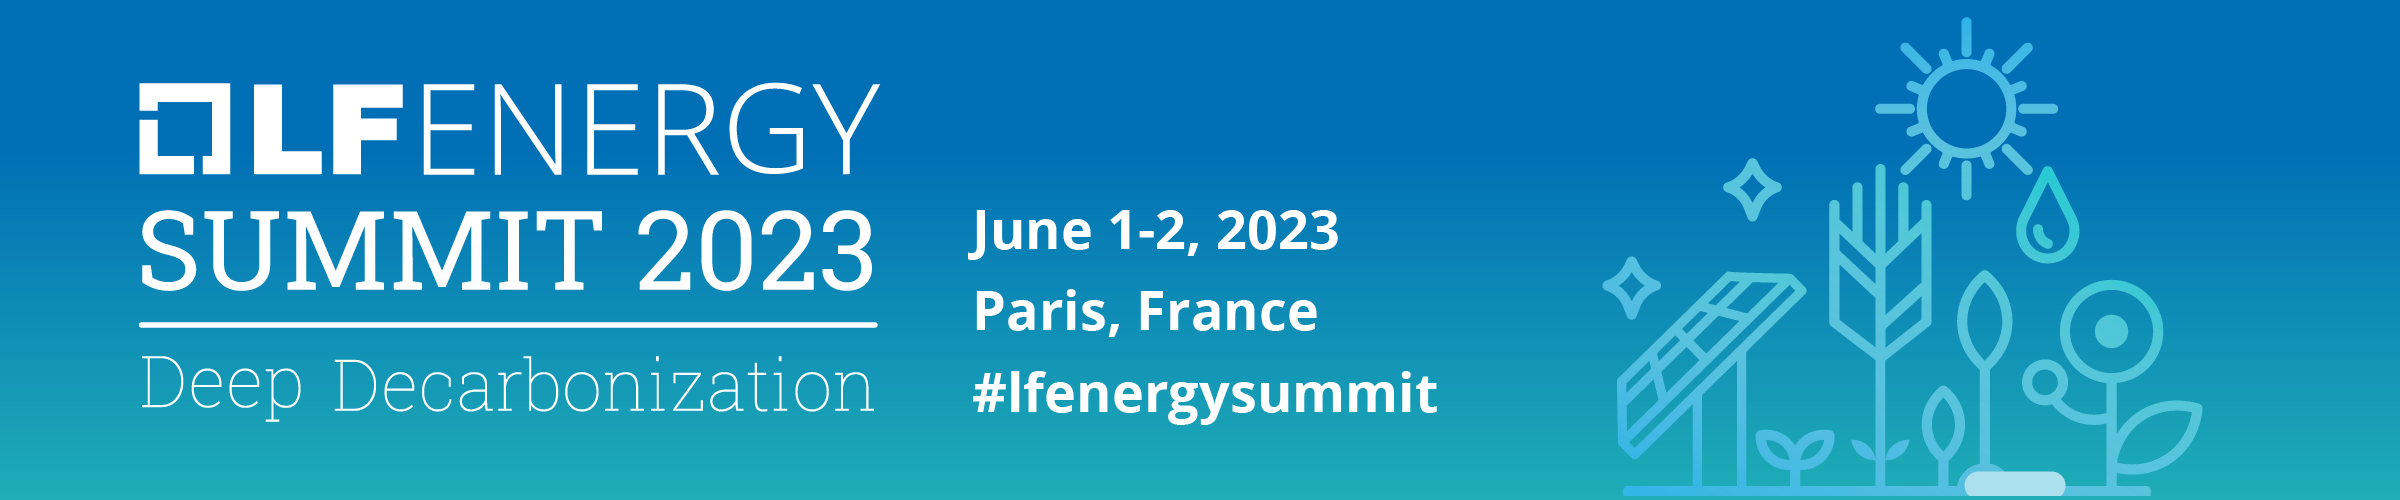 The LF Energy Summit will take place on June 1-2 in Paris.